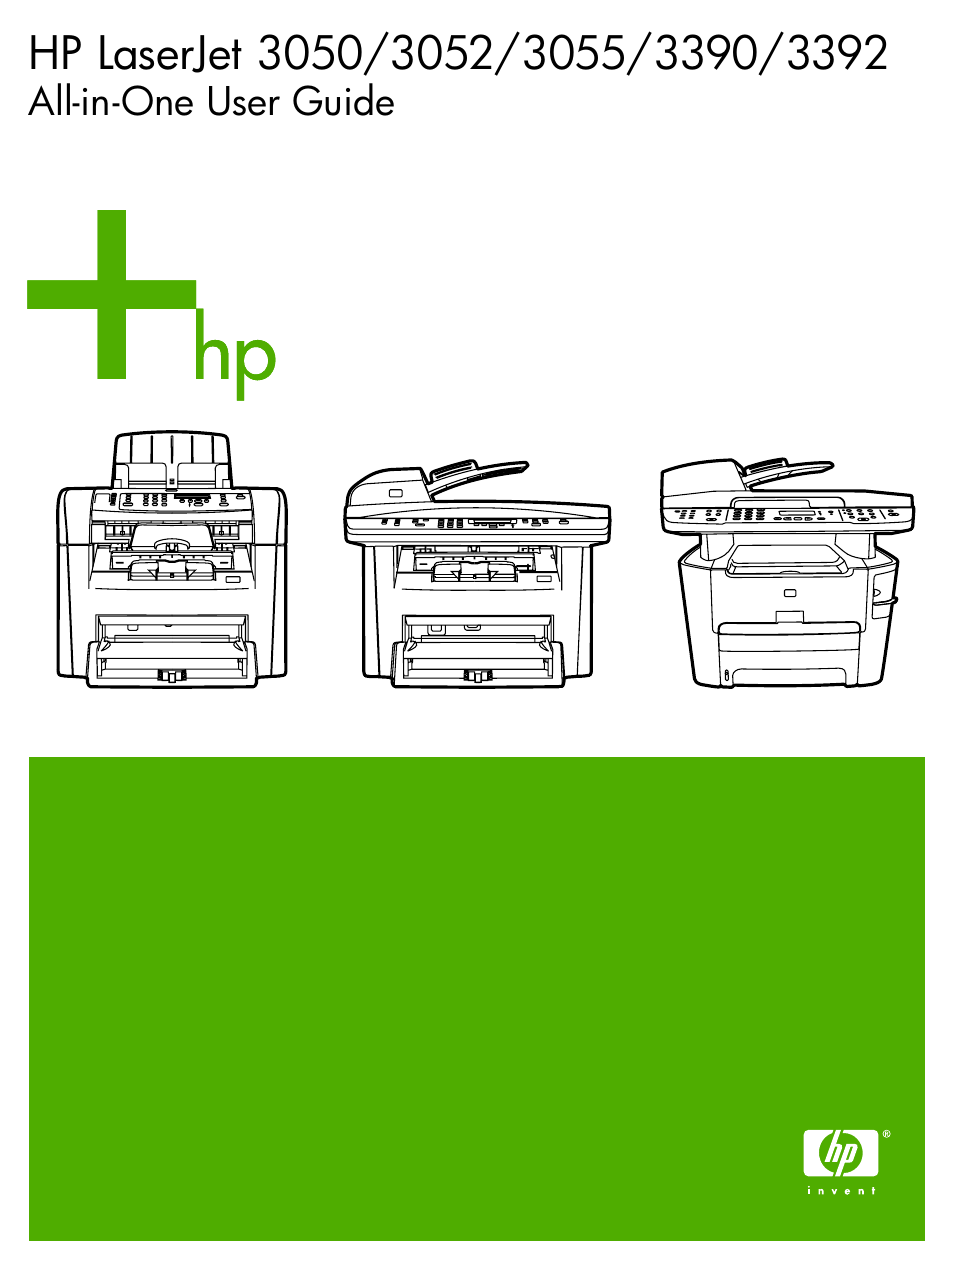 HP LaserJet 3055 User Manual | 430 pages | Also for: LaserJet 3050, LaserJet  3392, LaserJet 3052, LaserJet 3390